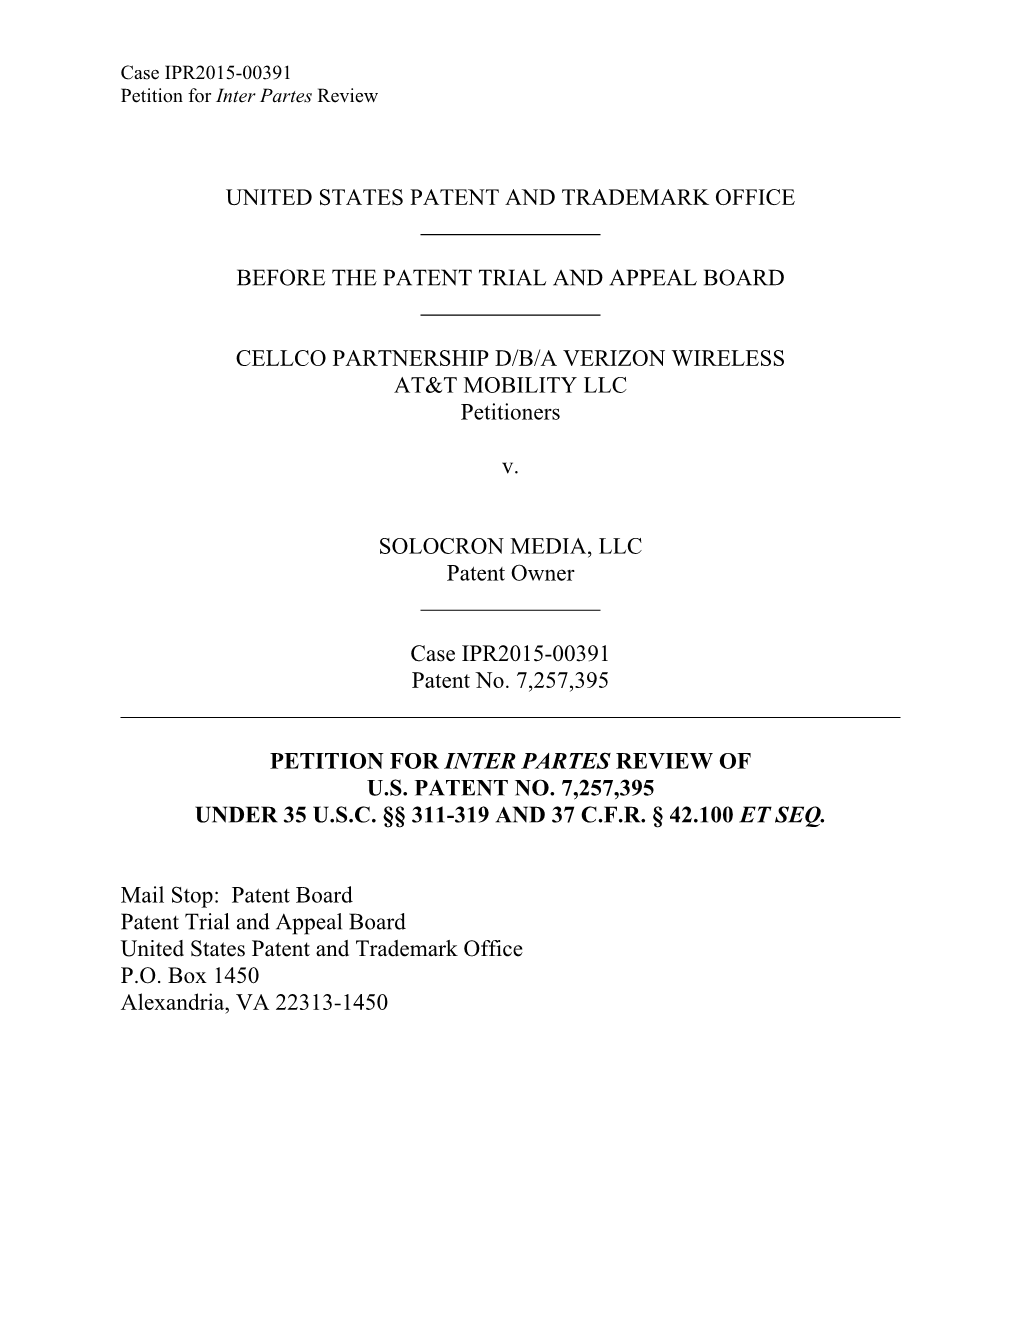 United States Patent and Trademark Office Before